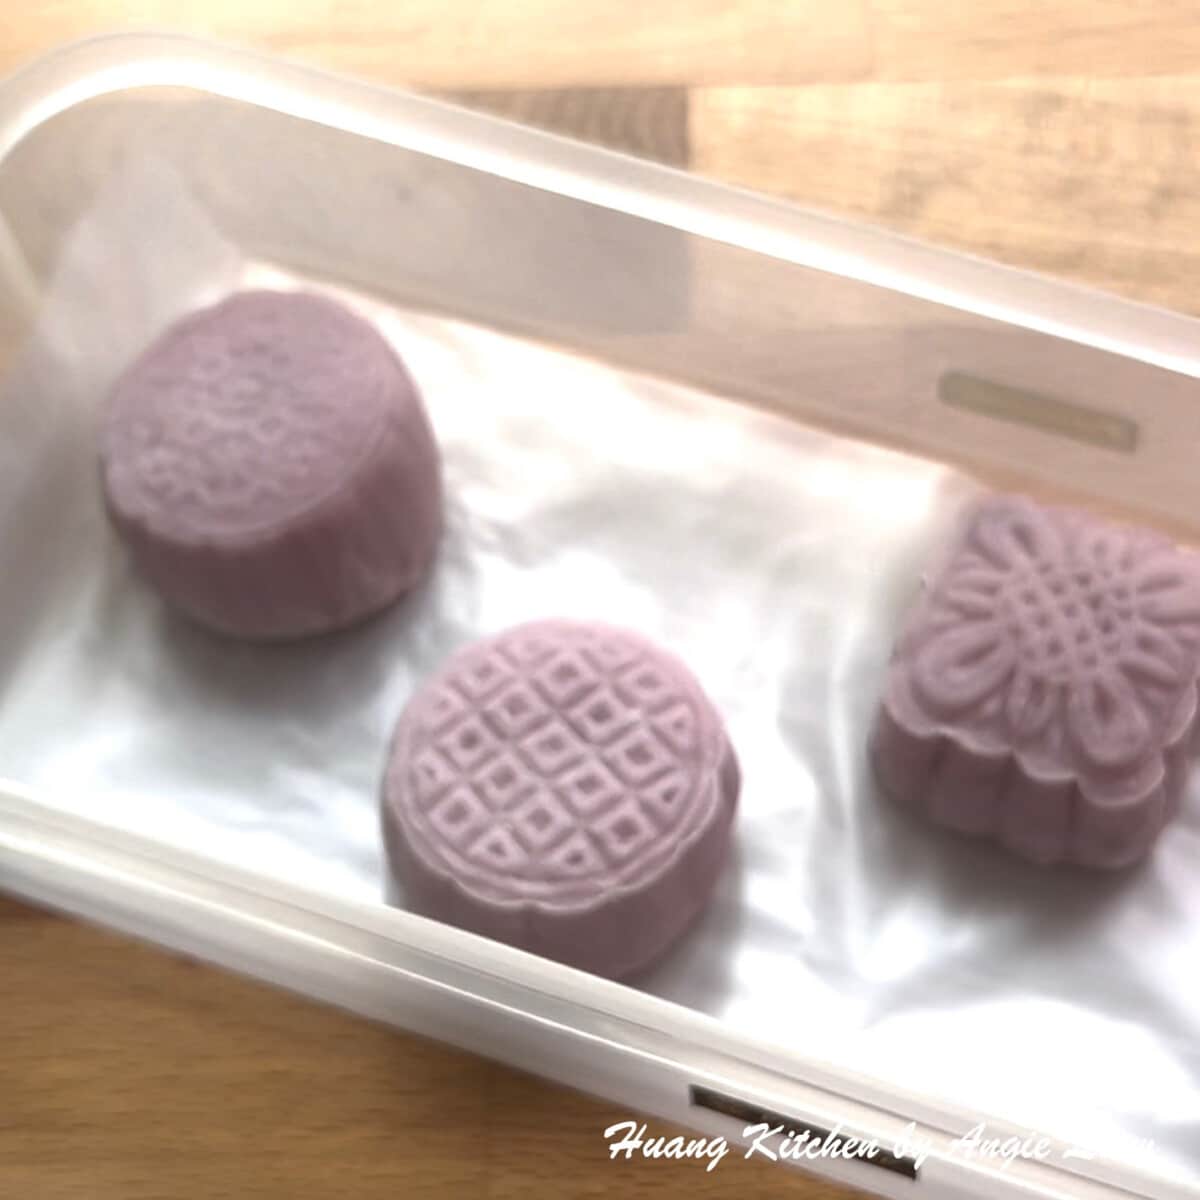 Store Snow Skin Mooncakes in airtight container.